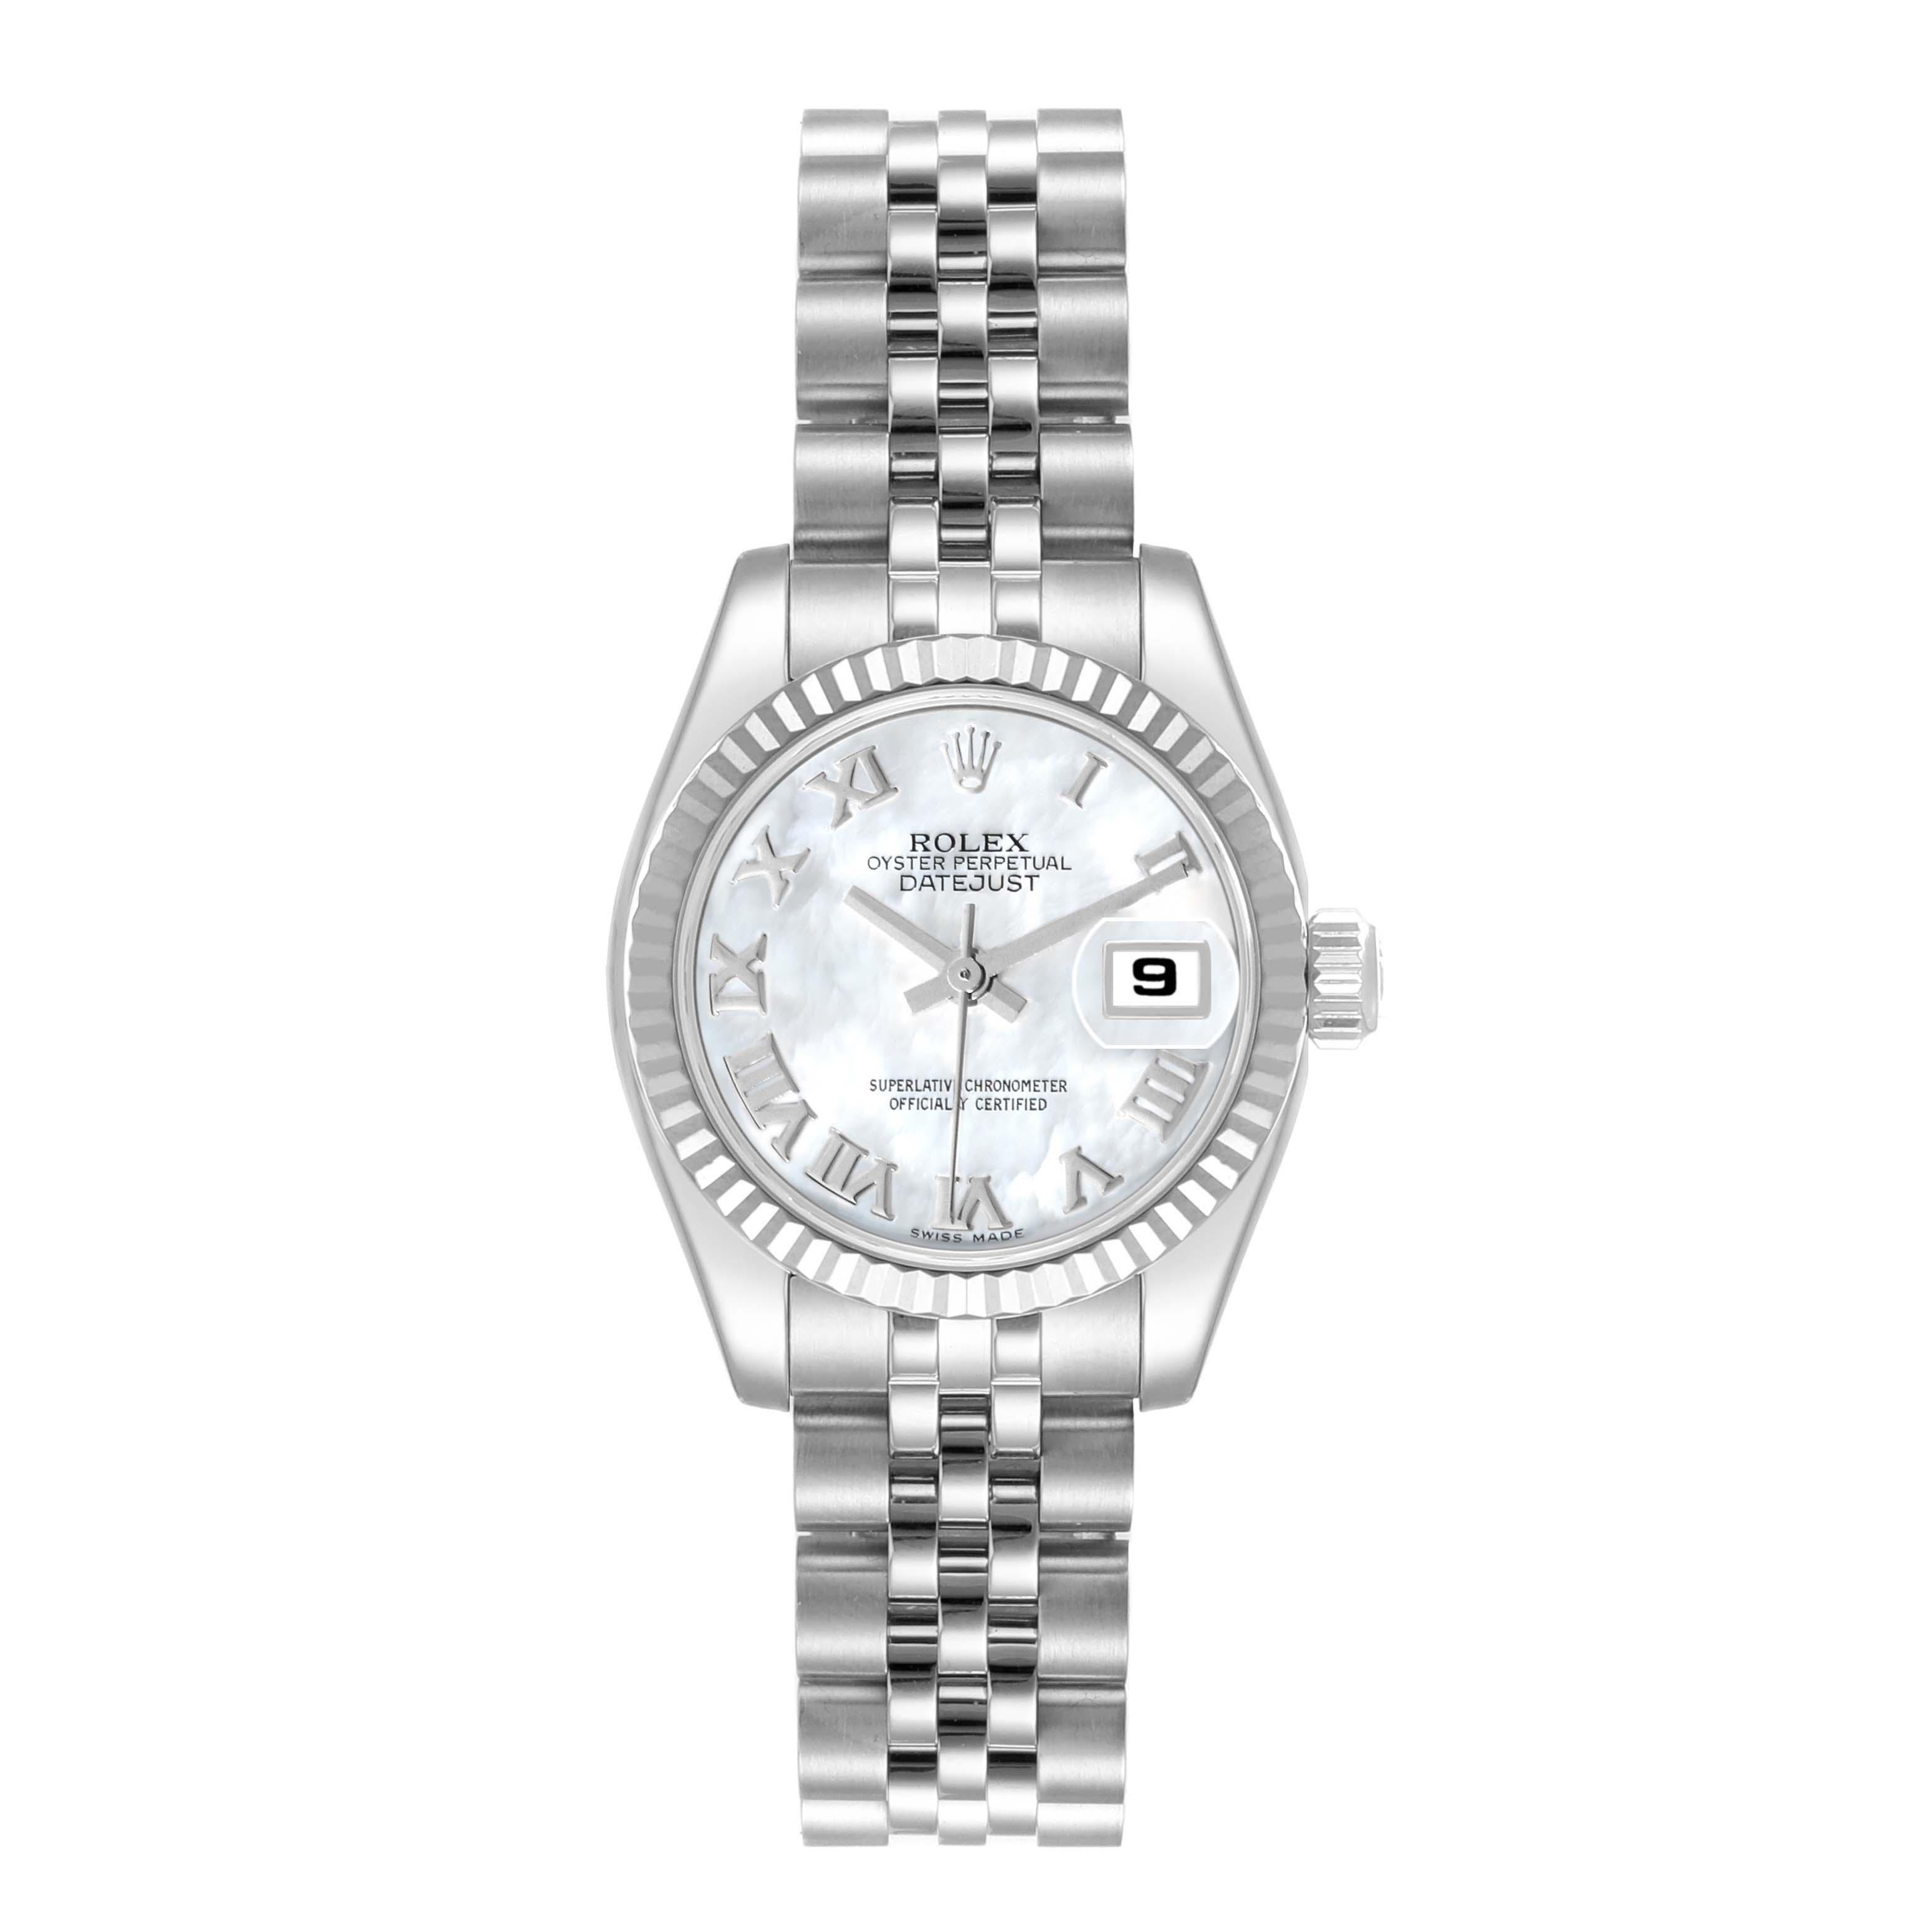 Rolex Datejust Steel White Gold Mother of Pearl Dial Ladies Watch 179174. Officially certified chronometer automatic self-winding movement. Stainless steel oyster case 26.0 mm in diameter. Rolex logo on the crown. 18K white gold fluted bezel.